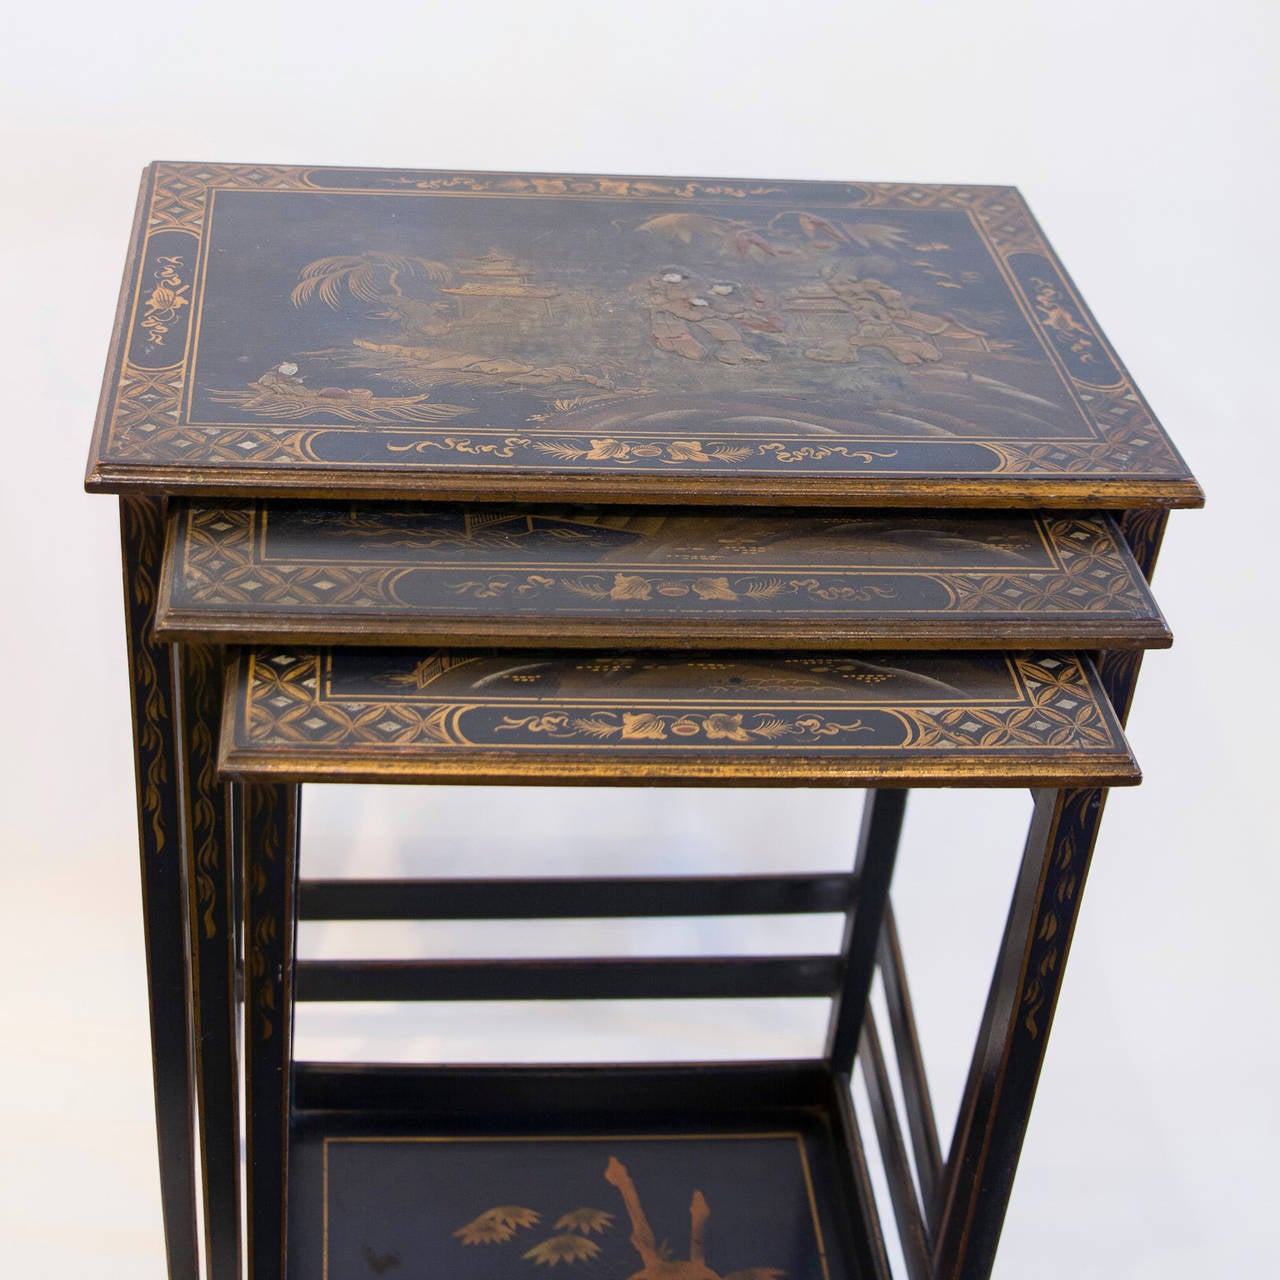 Set of Three English Chinoiserie-Decorated Nesting Tables, circa 1870. The smallest with decorated medial shelf. The largest measures: Width: 20.5, Height: 28.25 in., Depth: 13.75